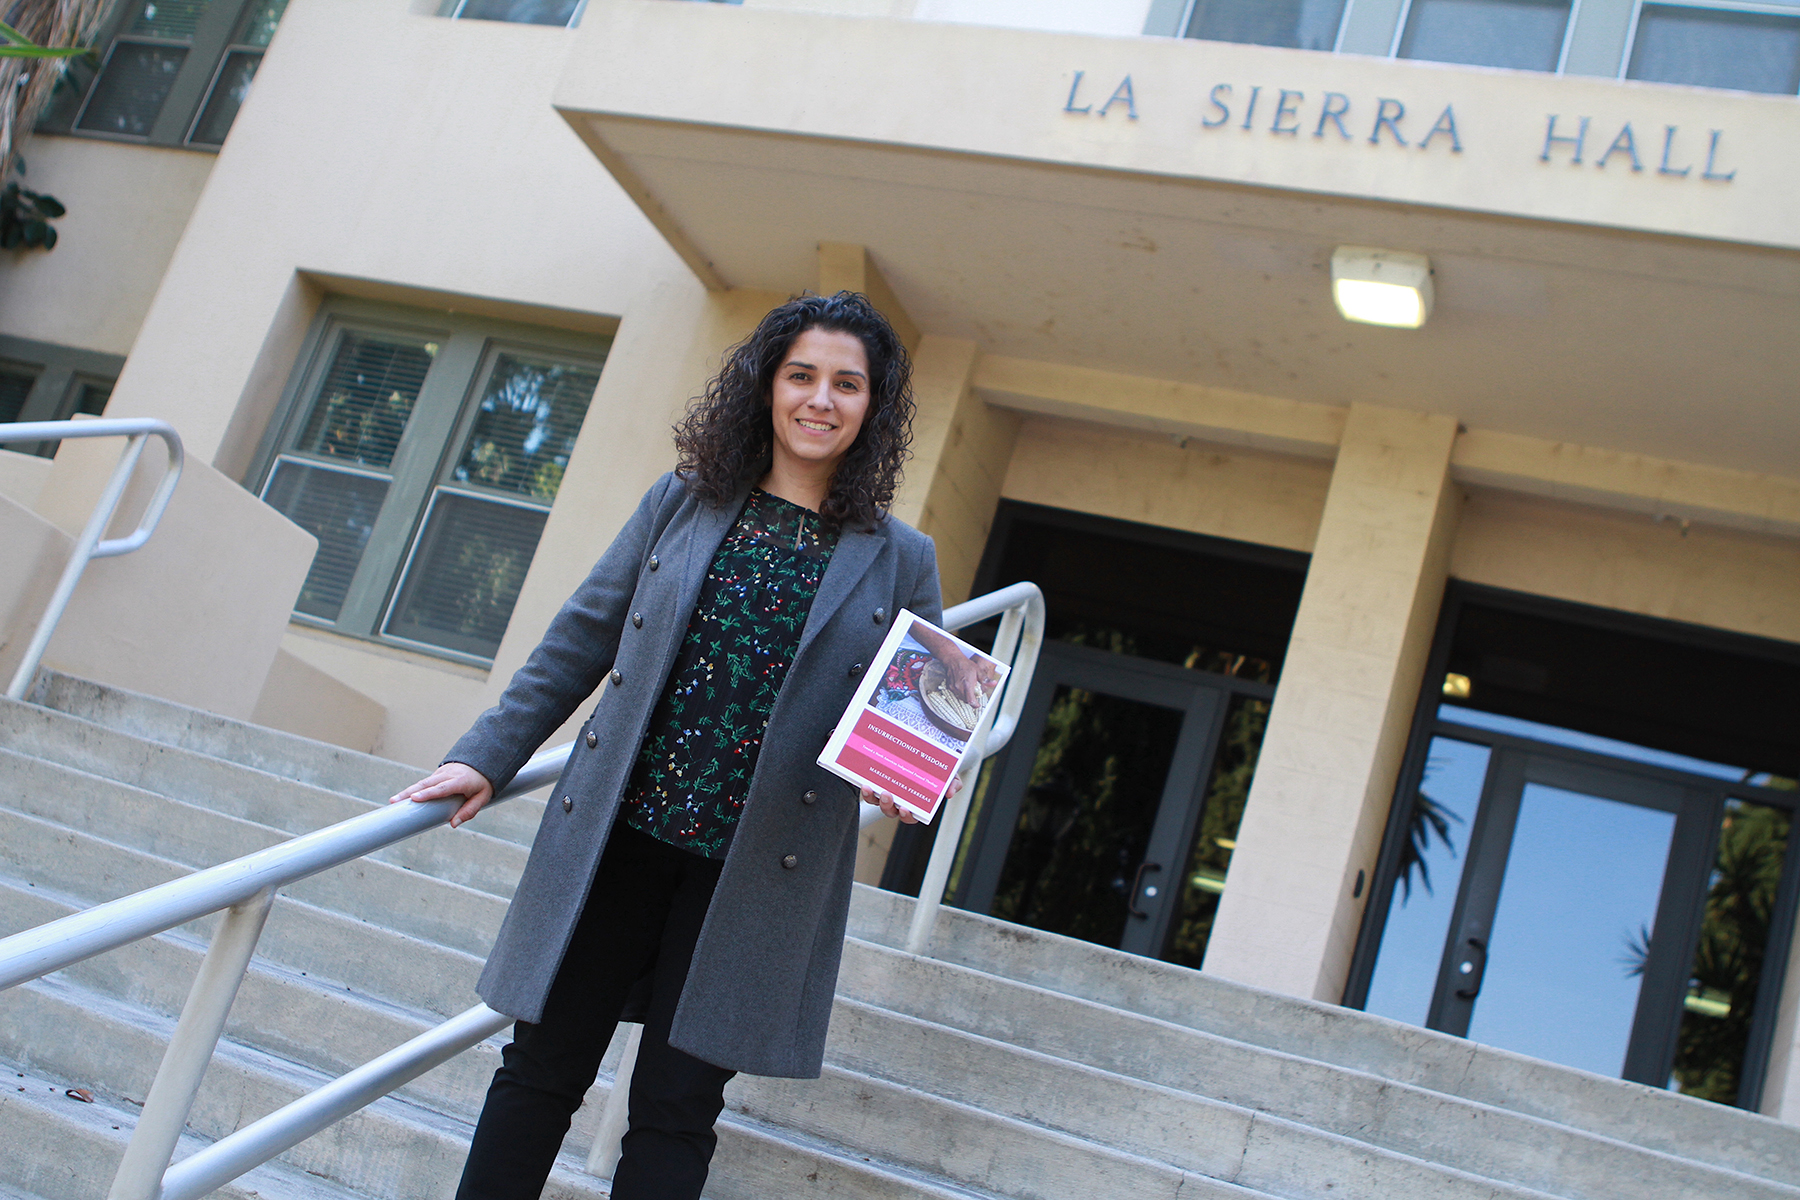 A smiling Hispanic woman stands on the steps of a building named "La Sierra Hall" holding a book. 